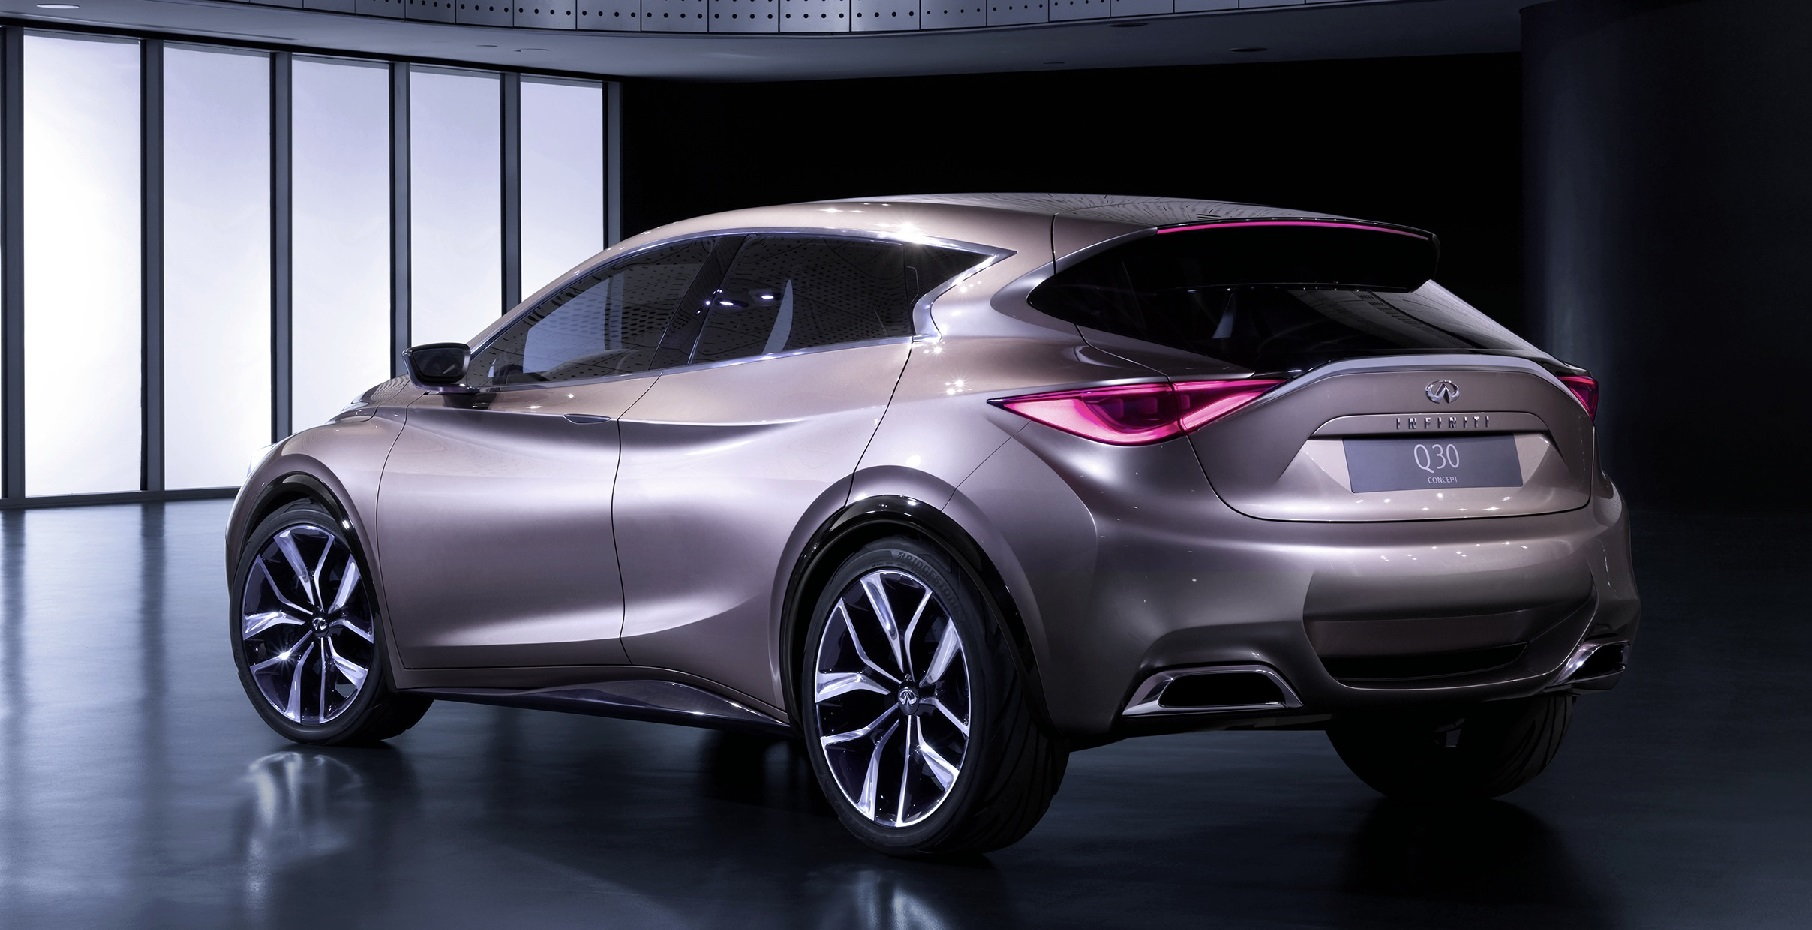 2017 Infiniti Q30: Pricing, Engine and Release Date